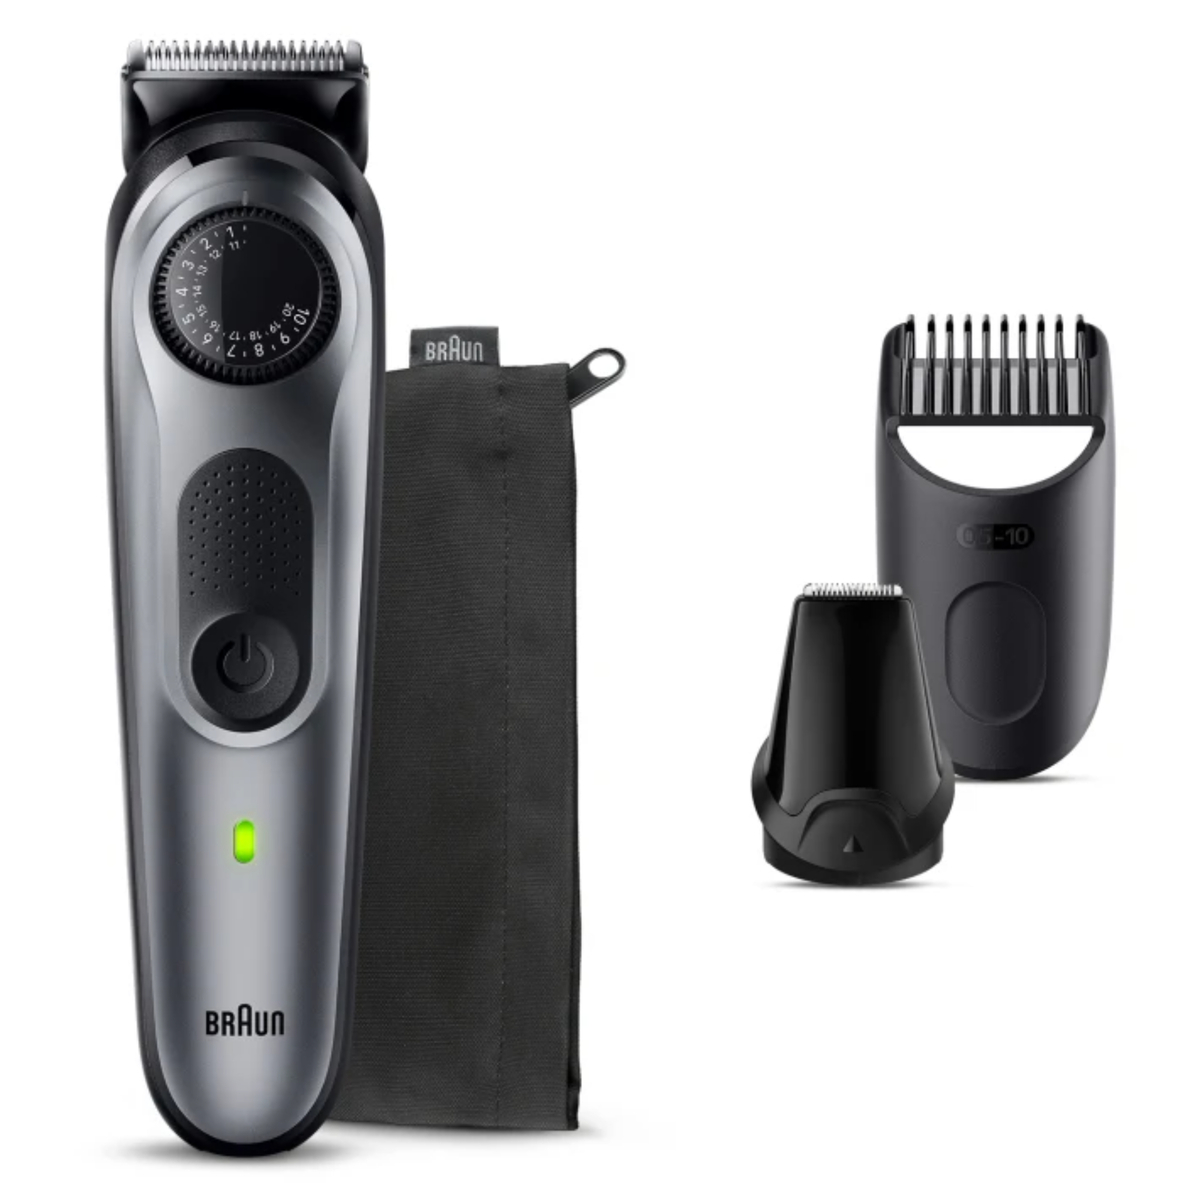 Braun Beard Trimmer with Precision Wheel and 5 Styling Tools, Grey, BT5440